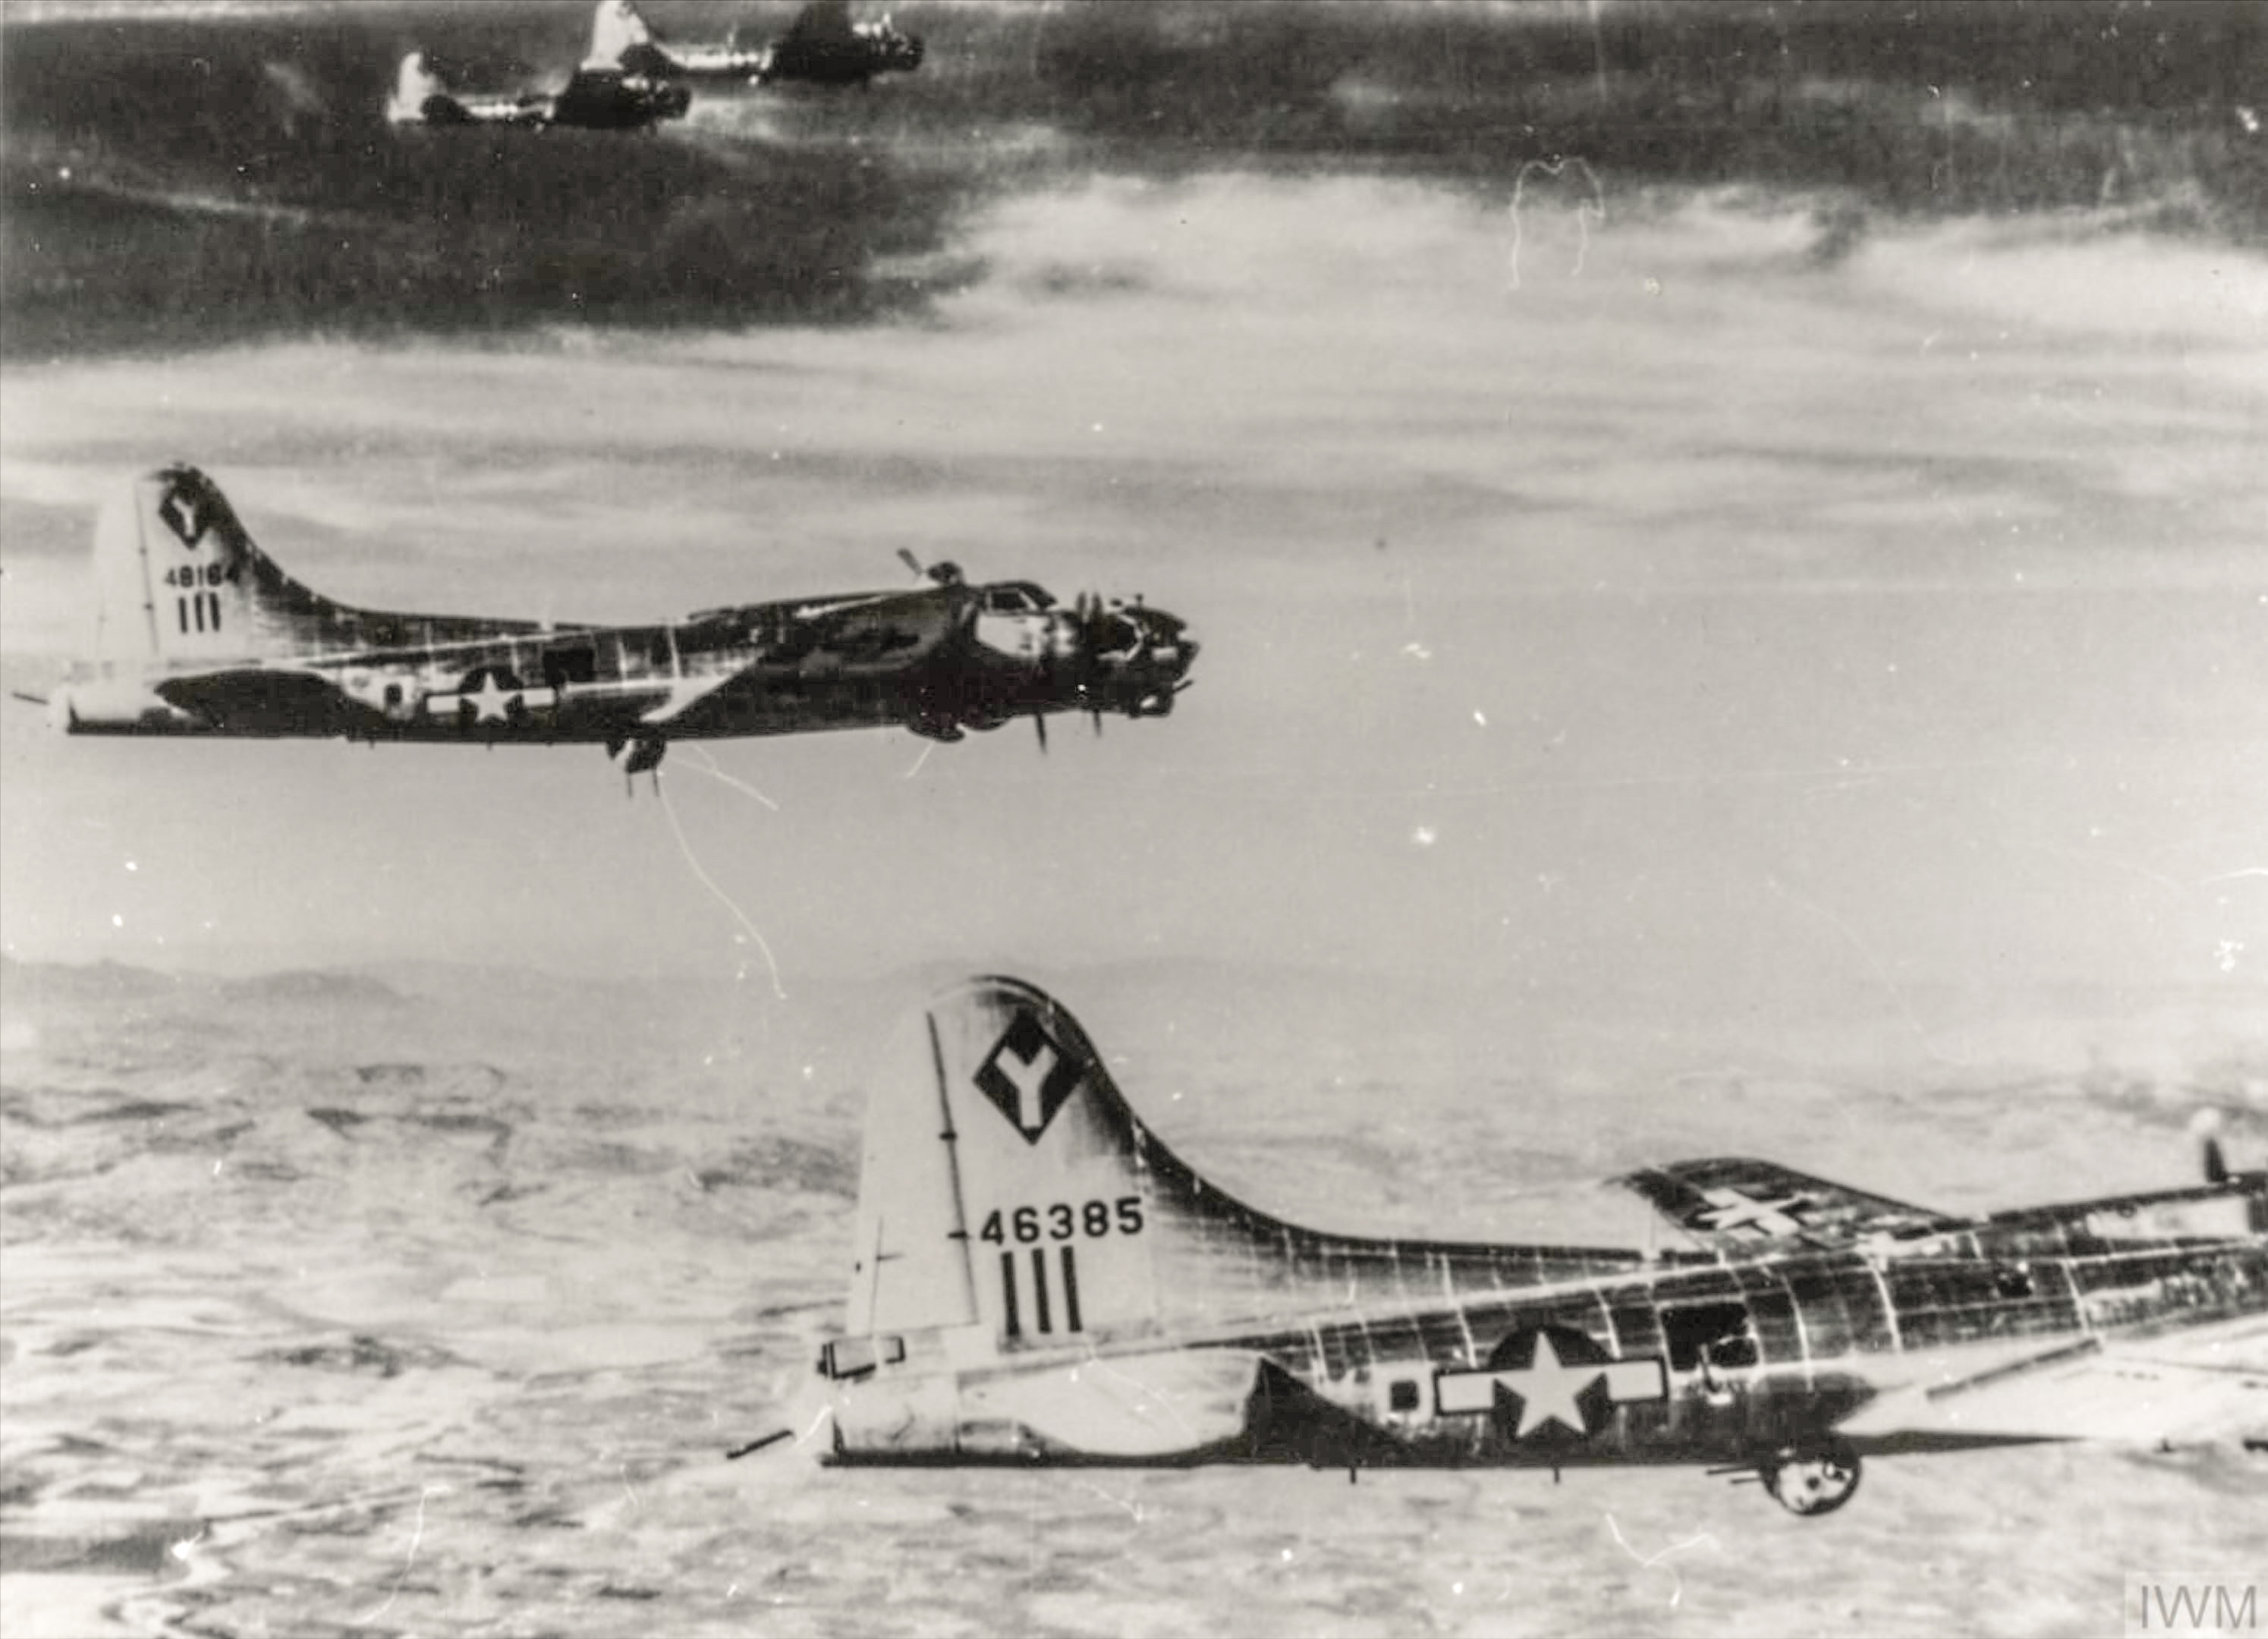 44 8164 B 17G Fortress 15AF 99BG348BS in formation during a mission FRE13982